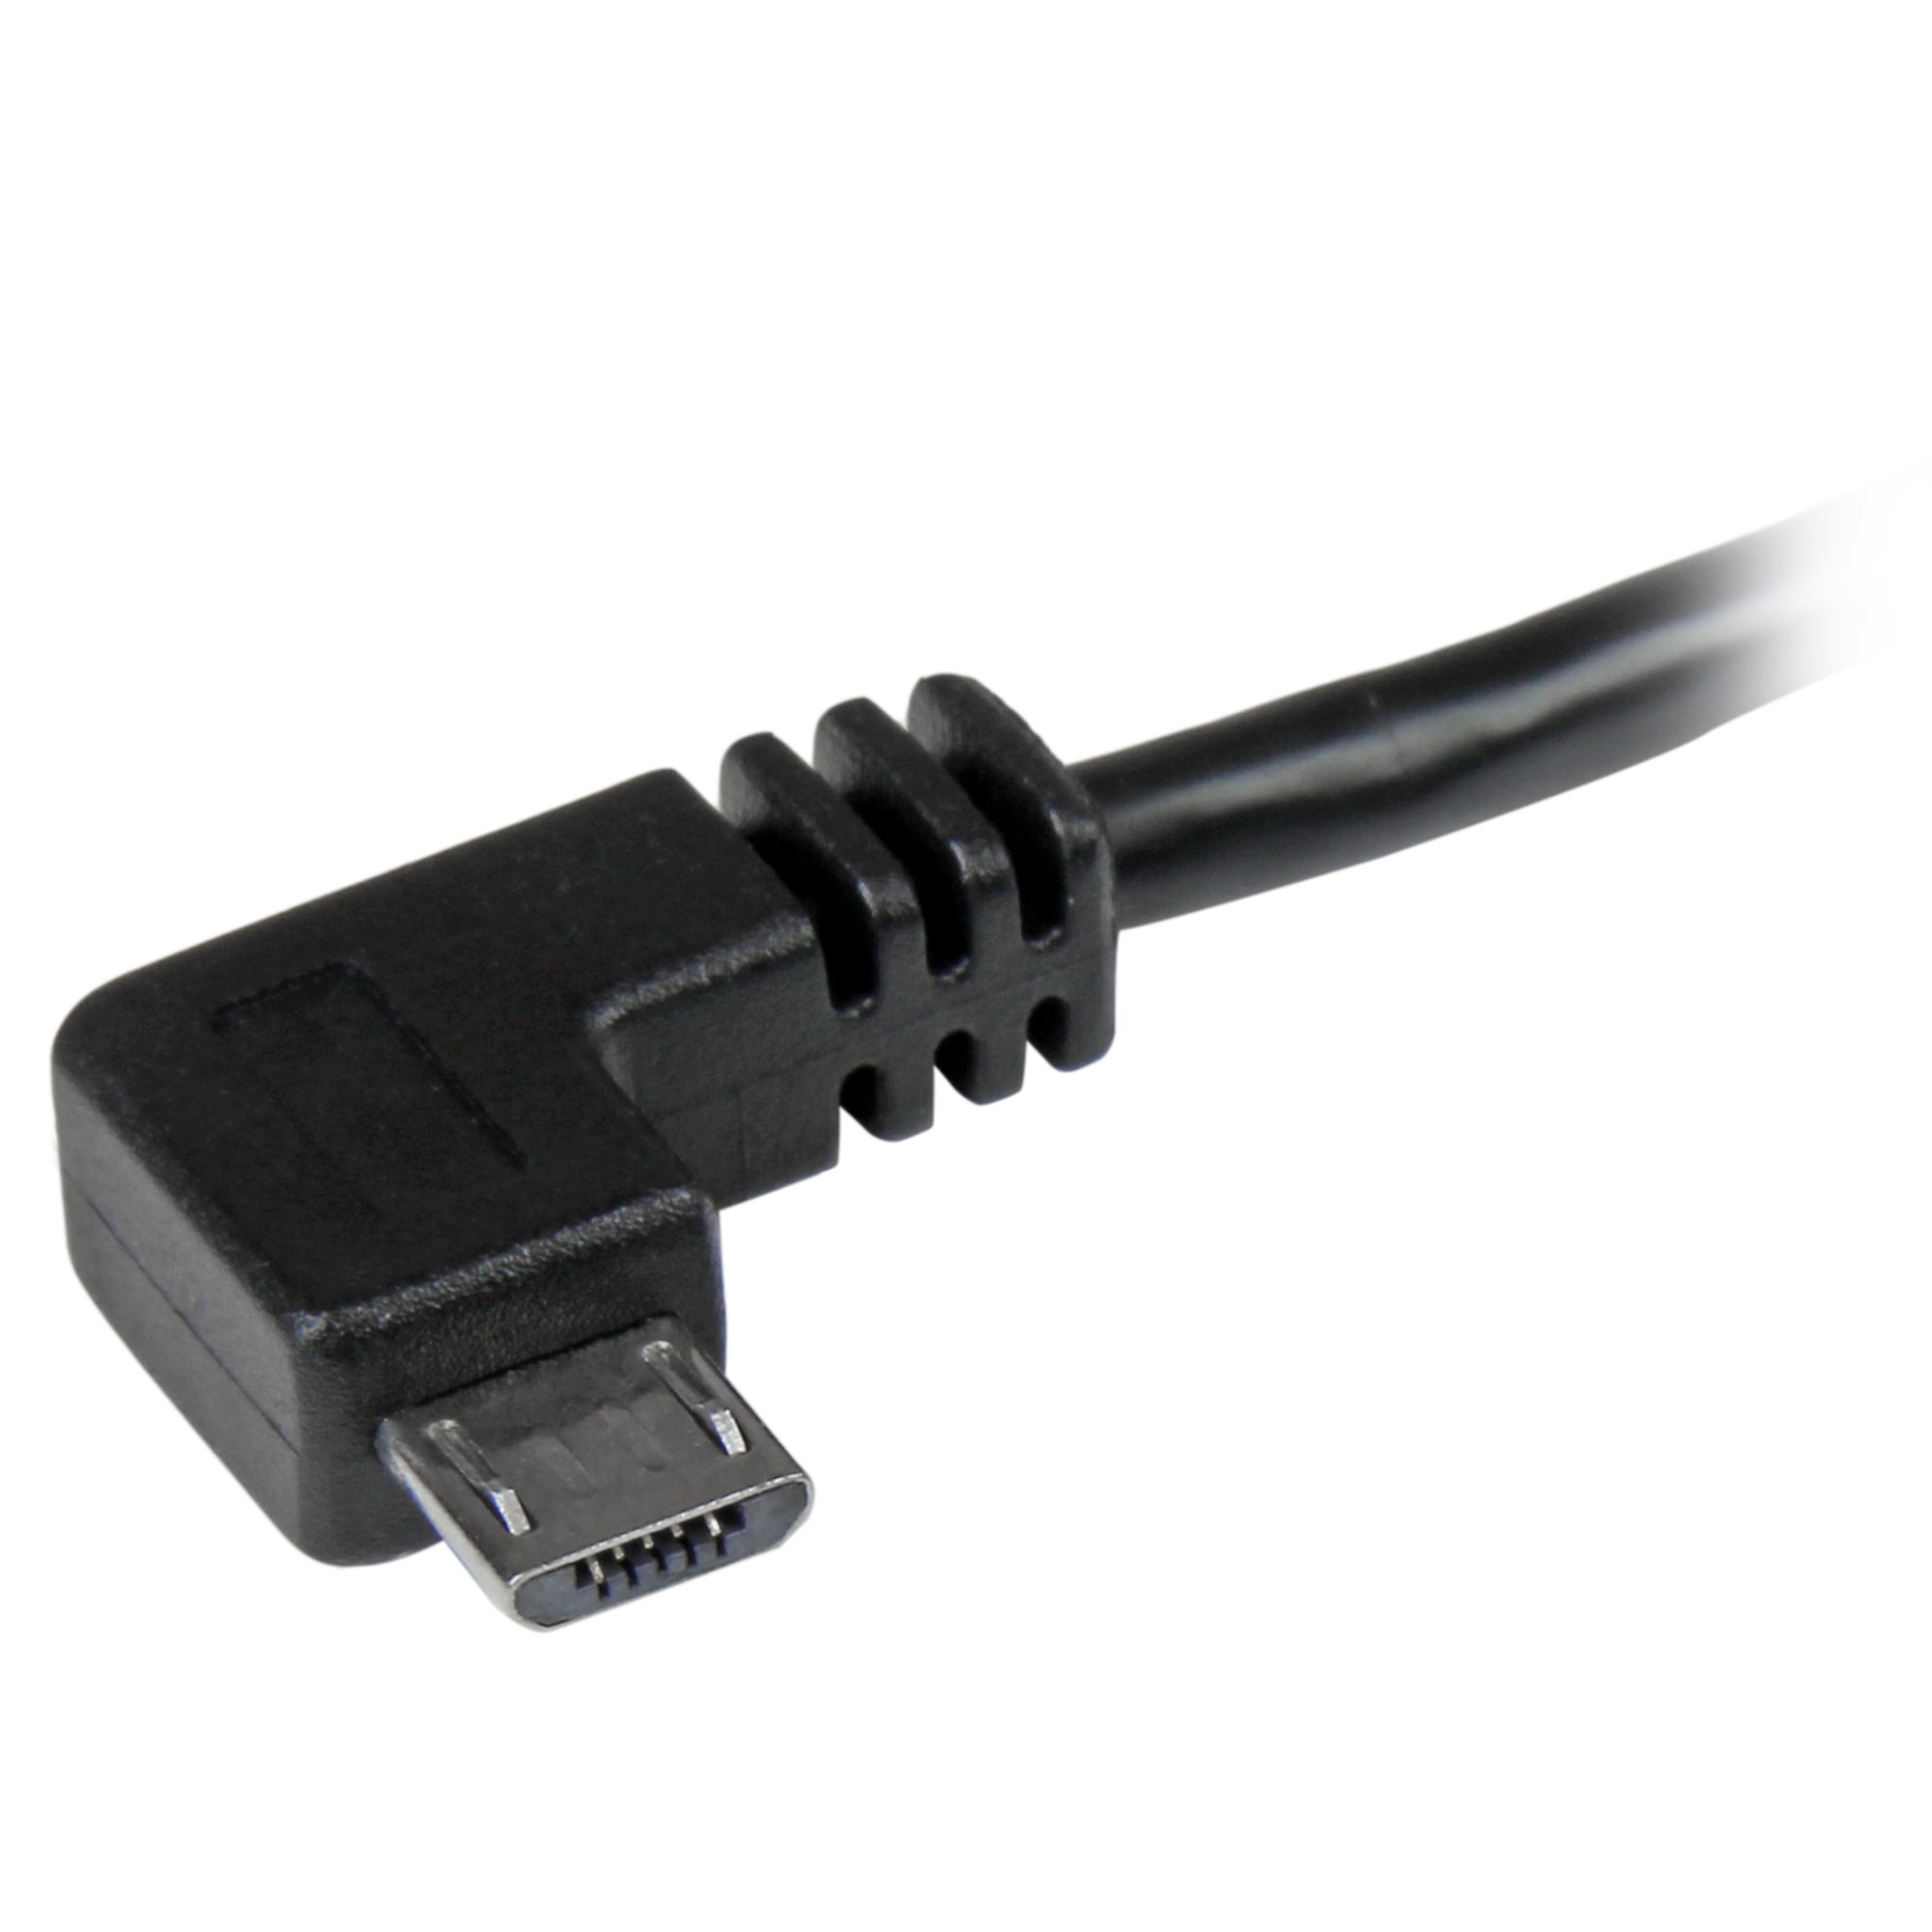 5M 3M Up Down Left Right Angled 90 Degree USB Micro USB Male to